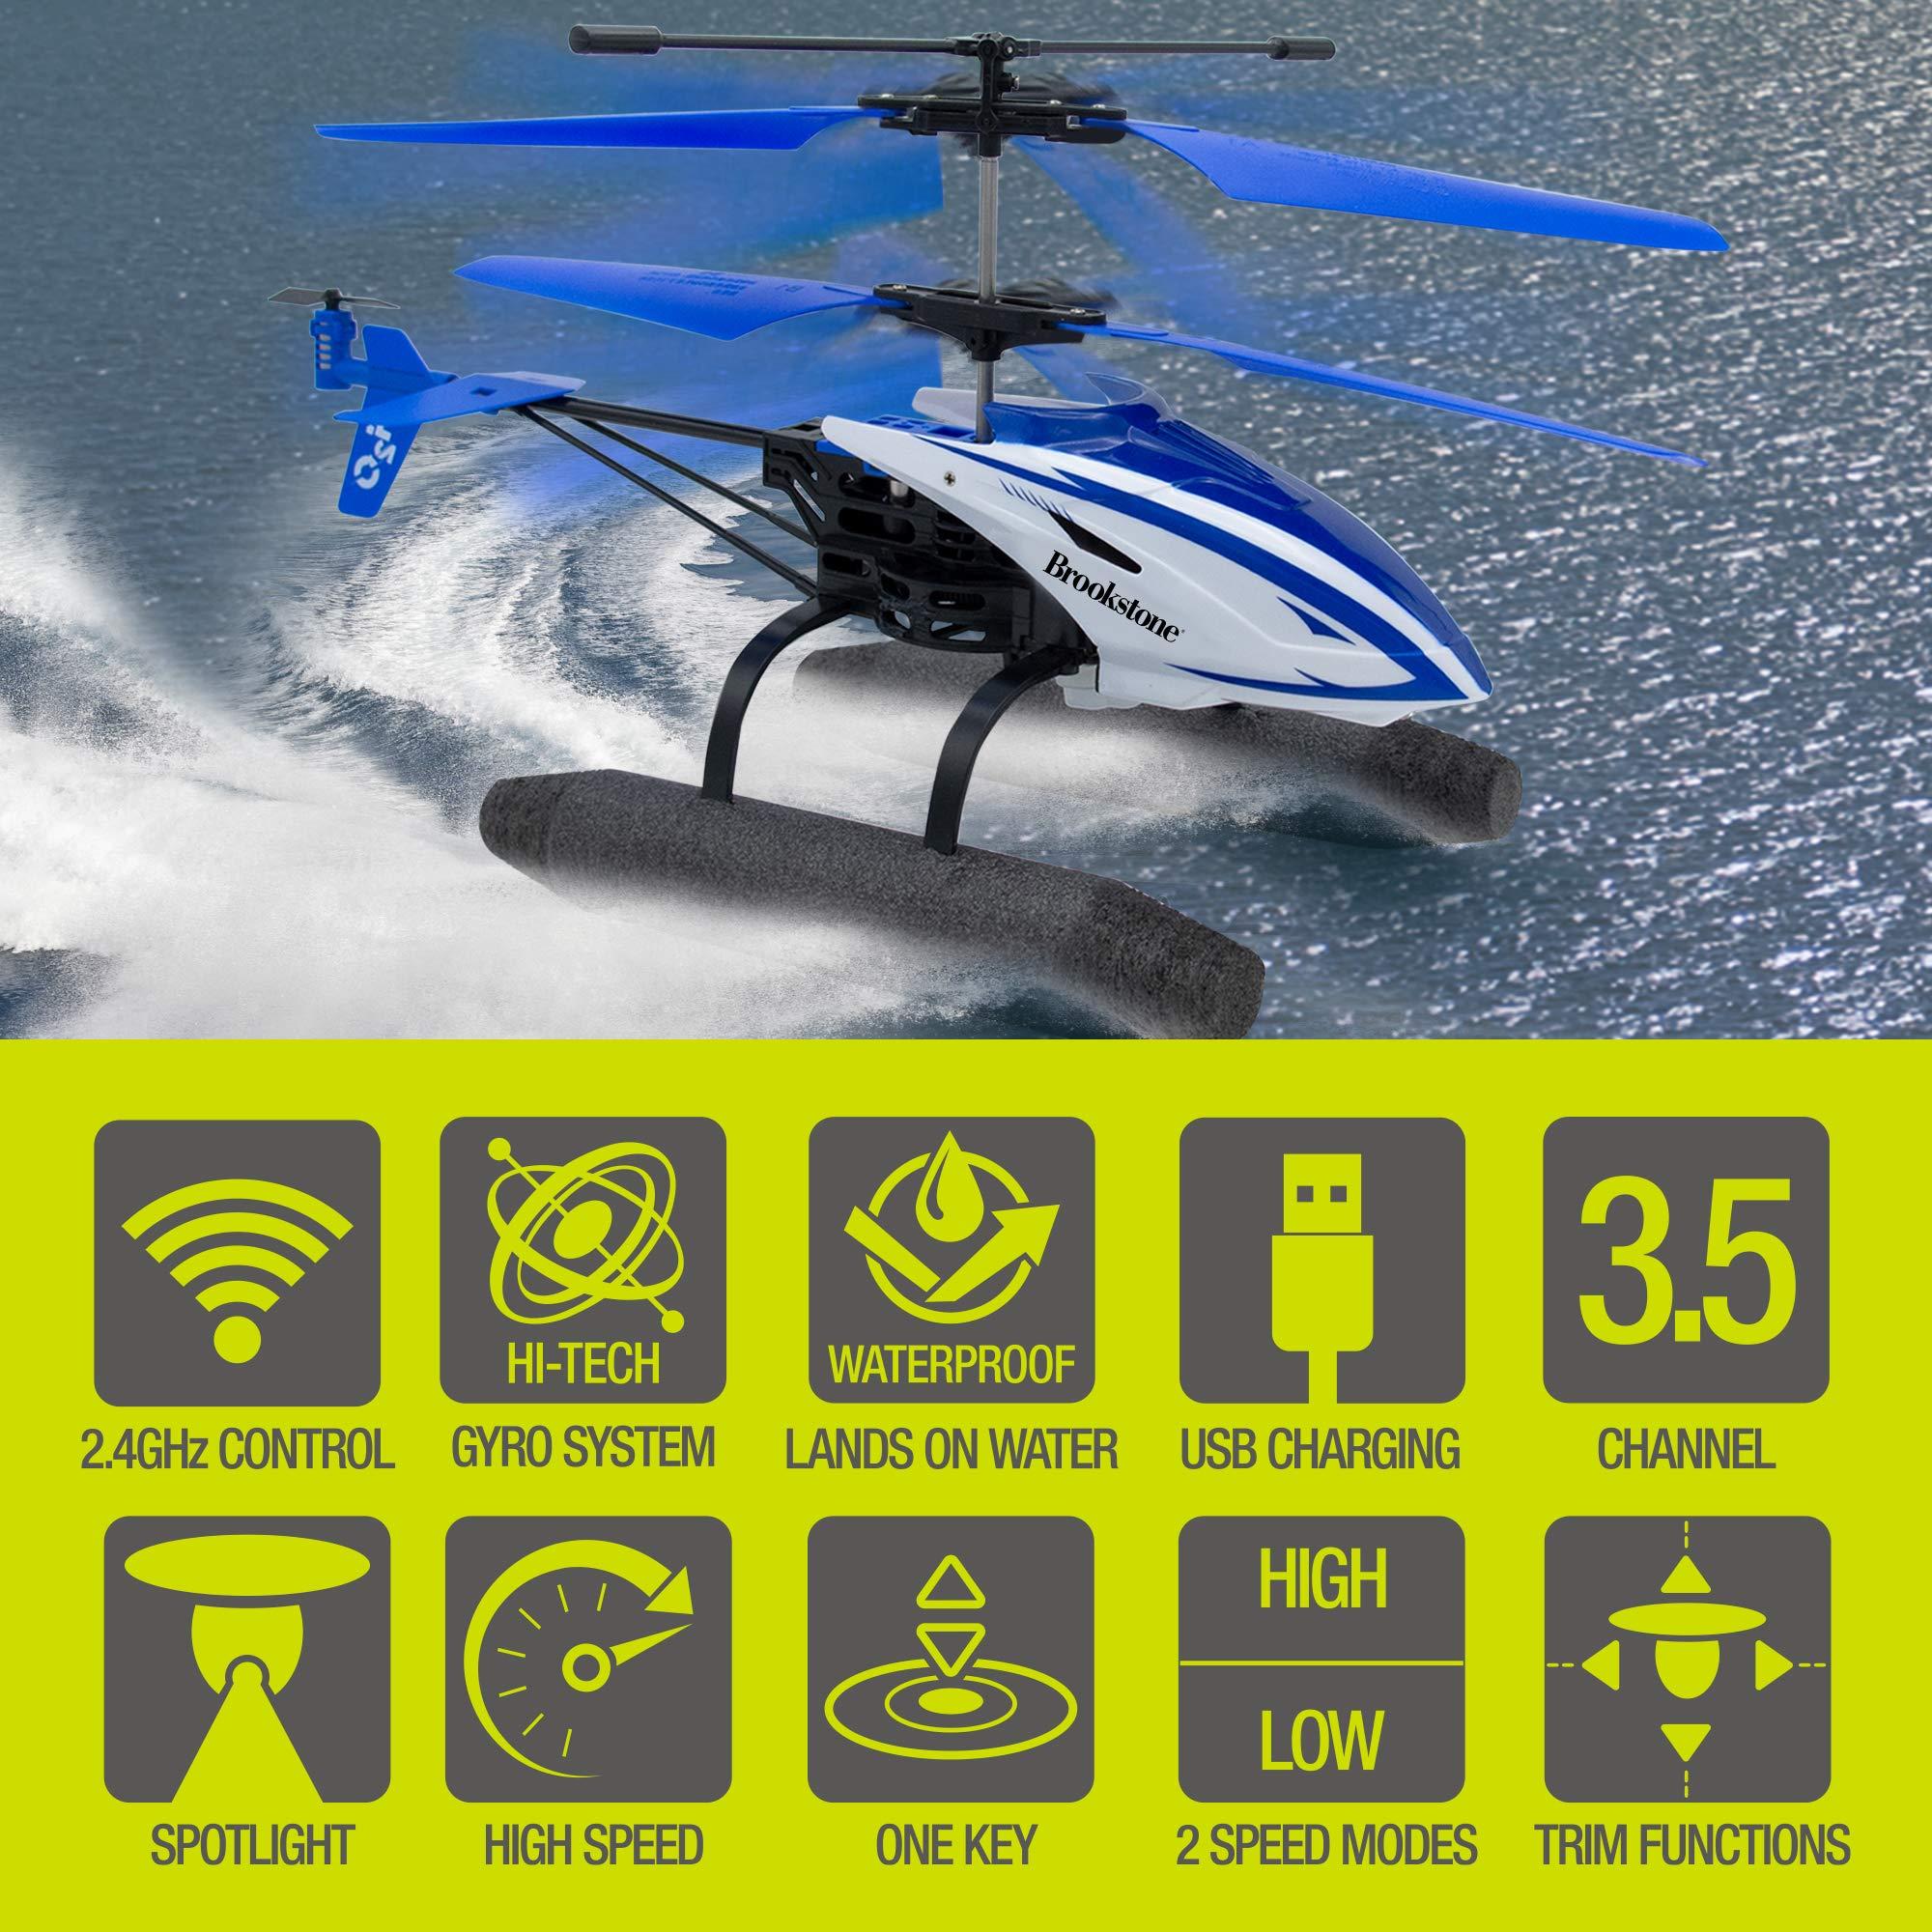 Brookstone Remote Control Helicopter: Valuable Tips for Flying a Brookstone Remote Control Helicopter